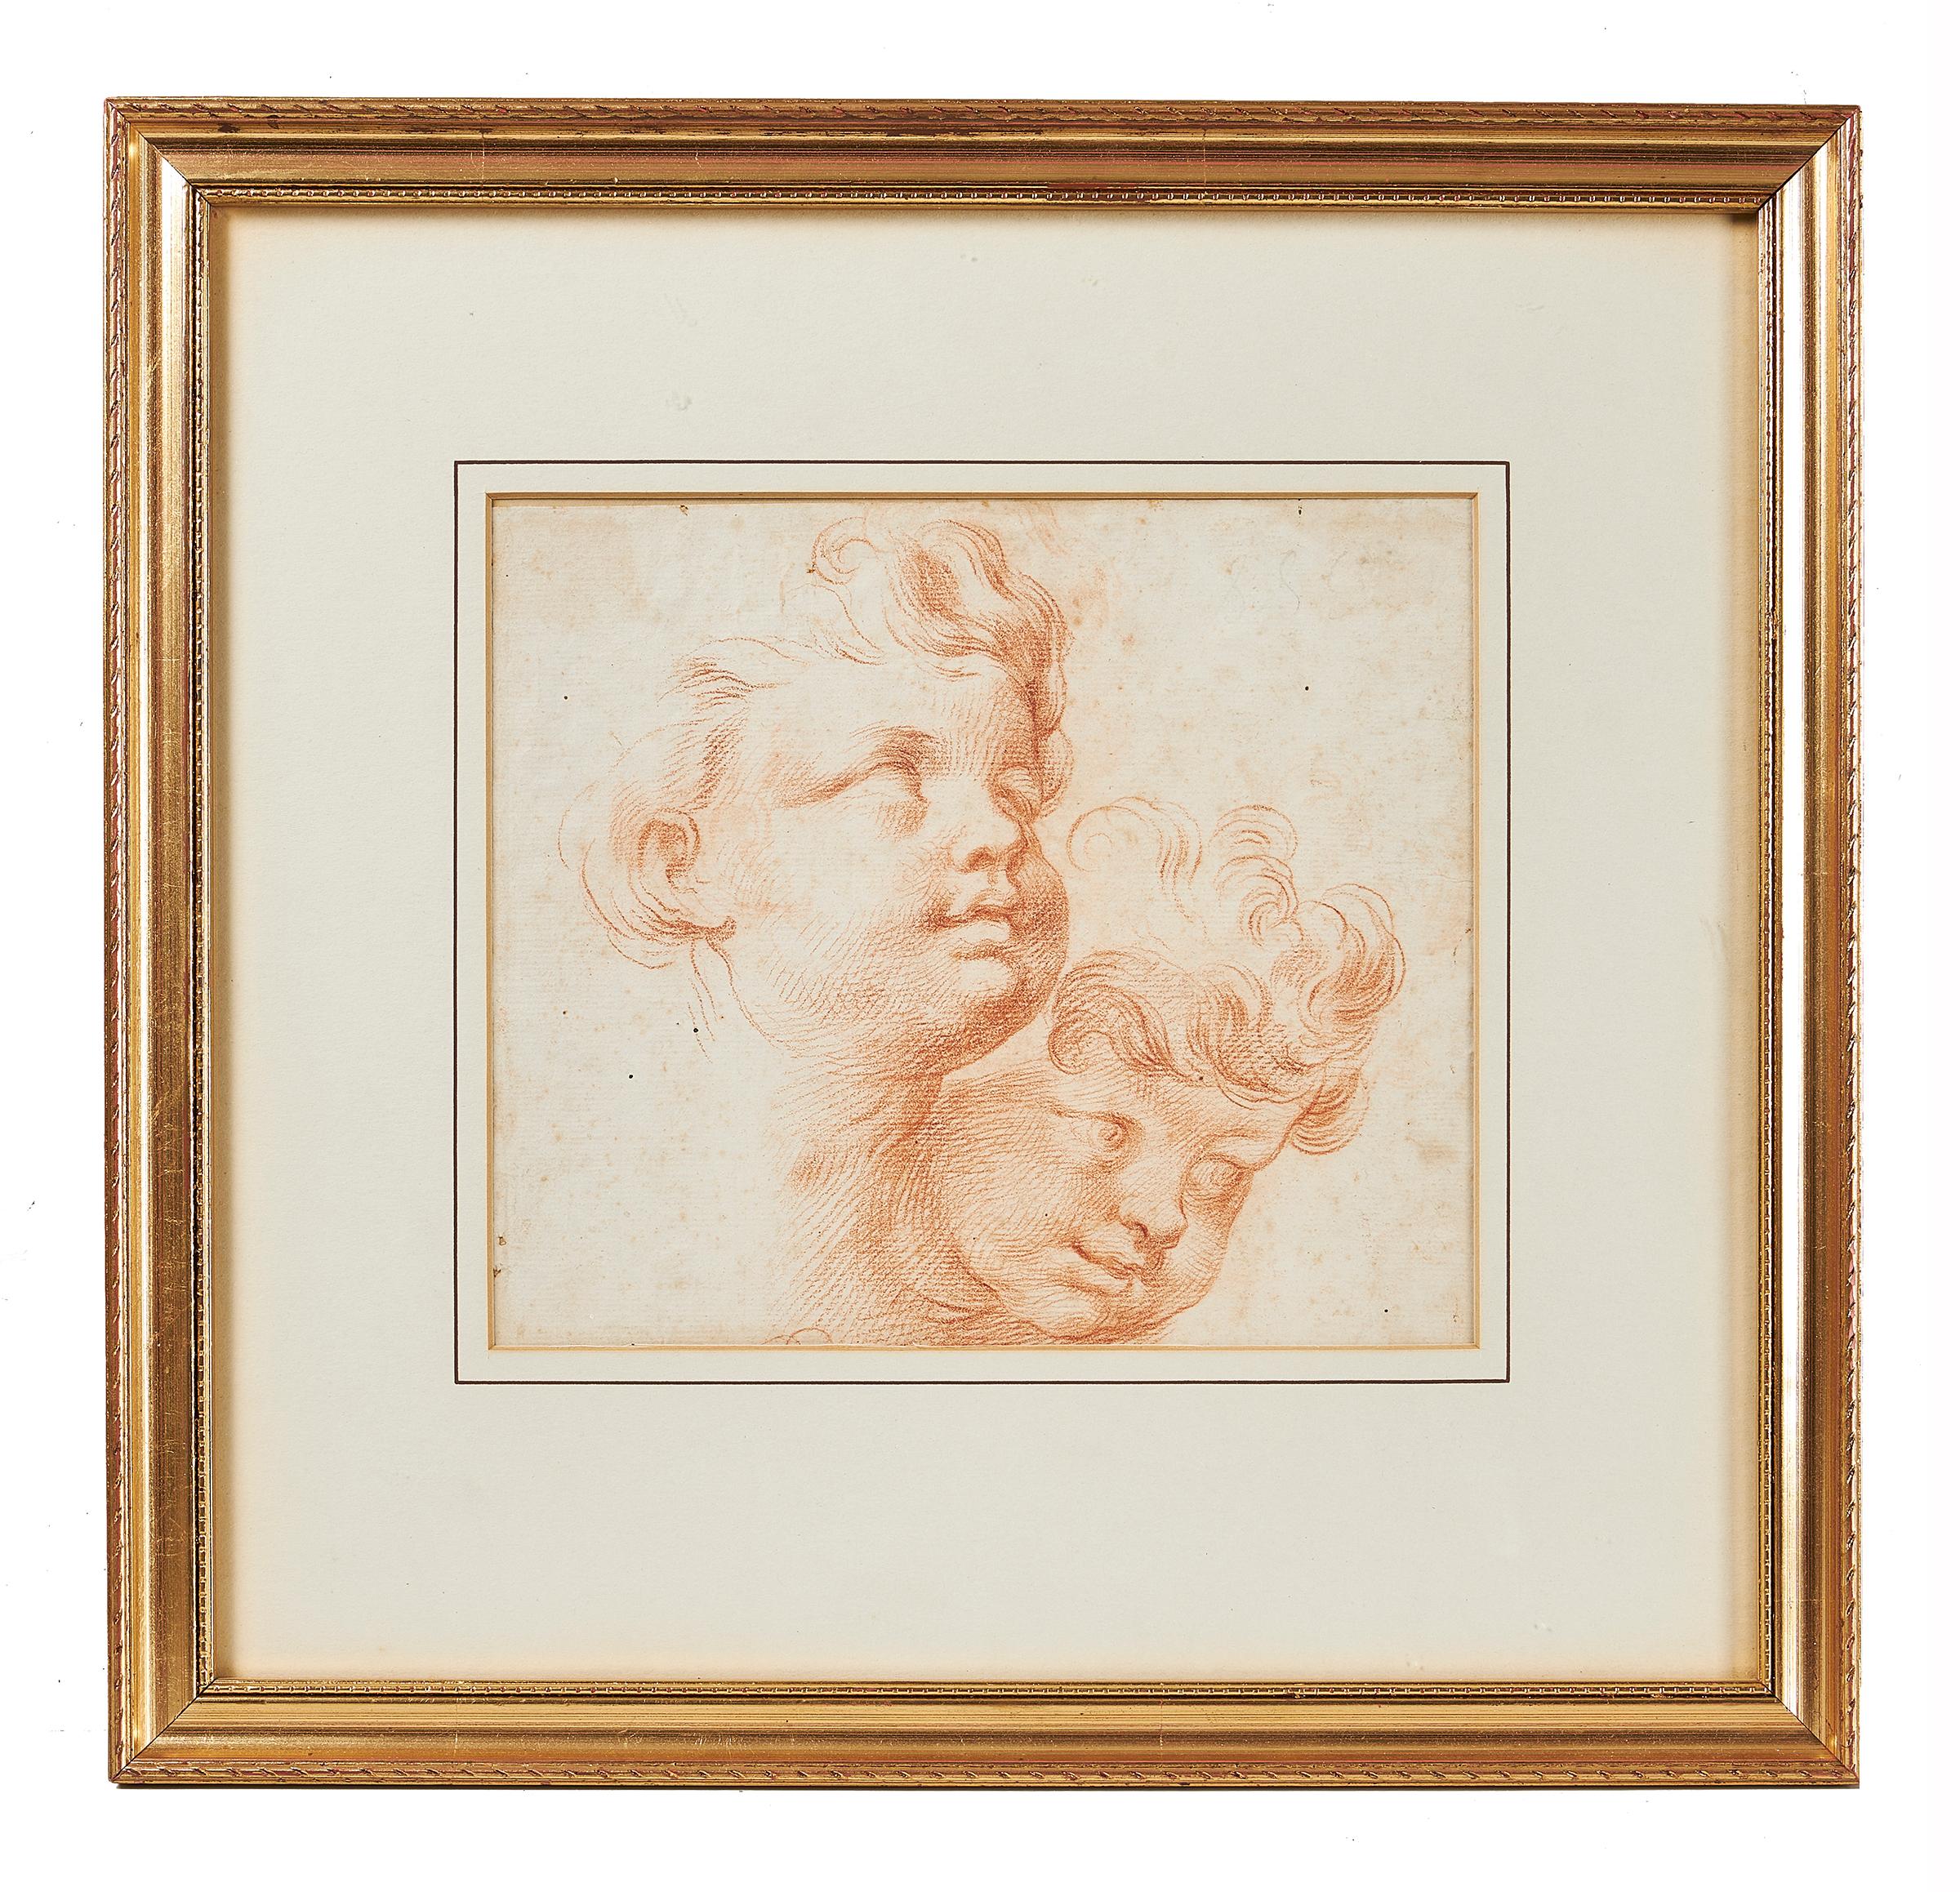 18th century Italian School head study of two young boys, alternatively two putti or cherubs, red chalk on laid paper, indistinctly signed SSE(?), framed.